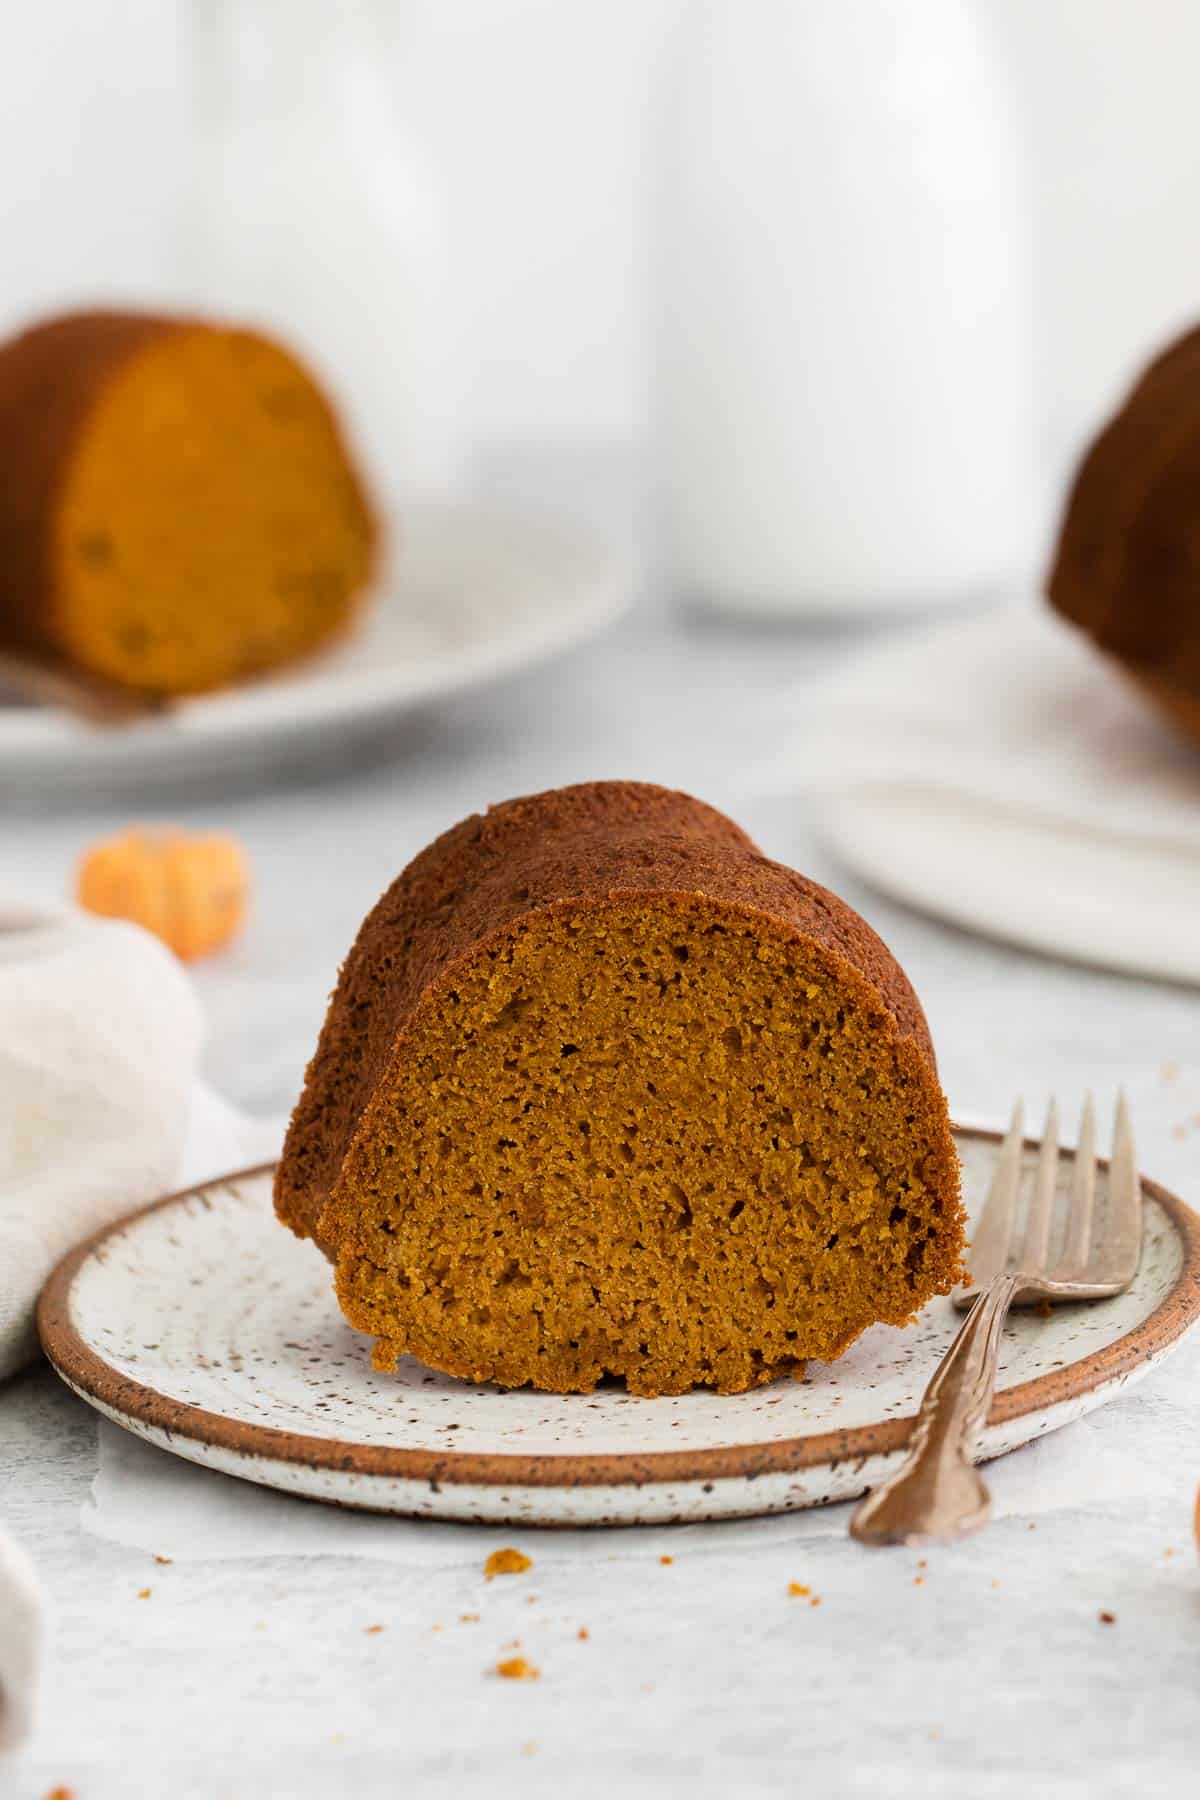 A slice of gluten-free pumpkin cake on a plate with a fork next to it